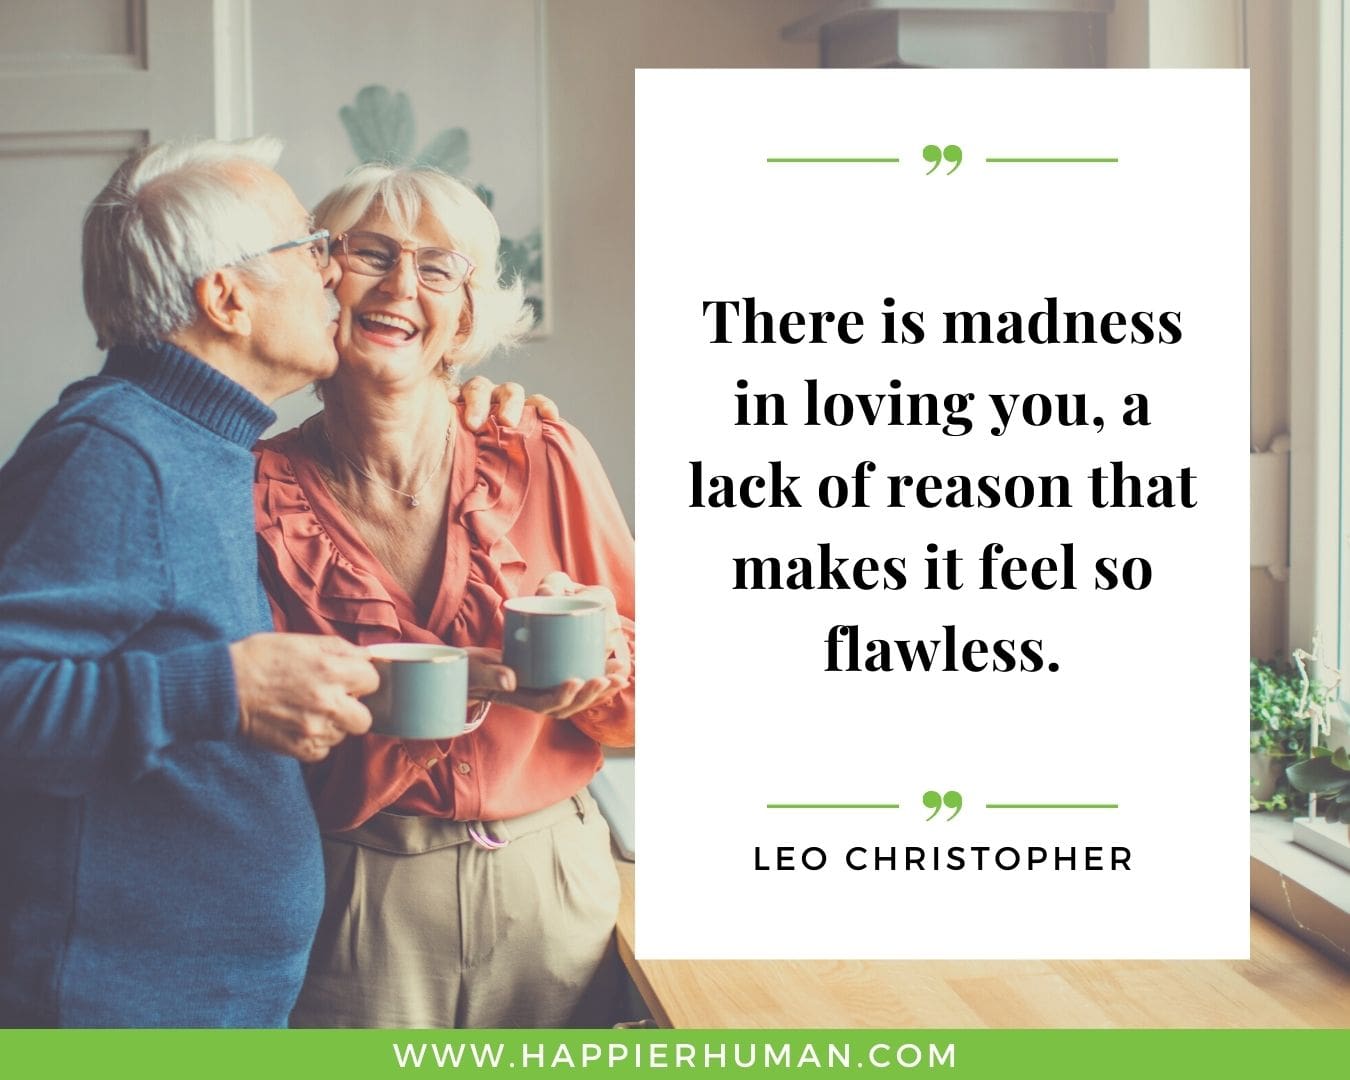 Unconditional Love Quotes for Her - “There is madness in loving you, a lack of reason that makes it feel so flawless. –Leo Christopher